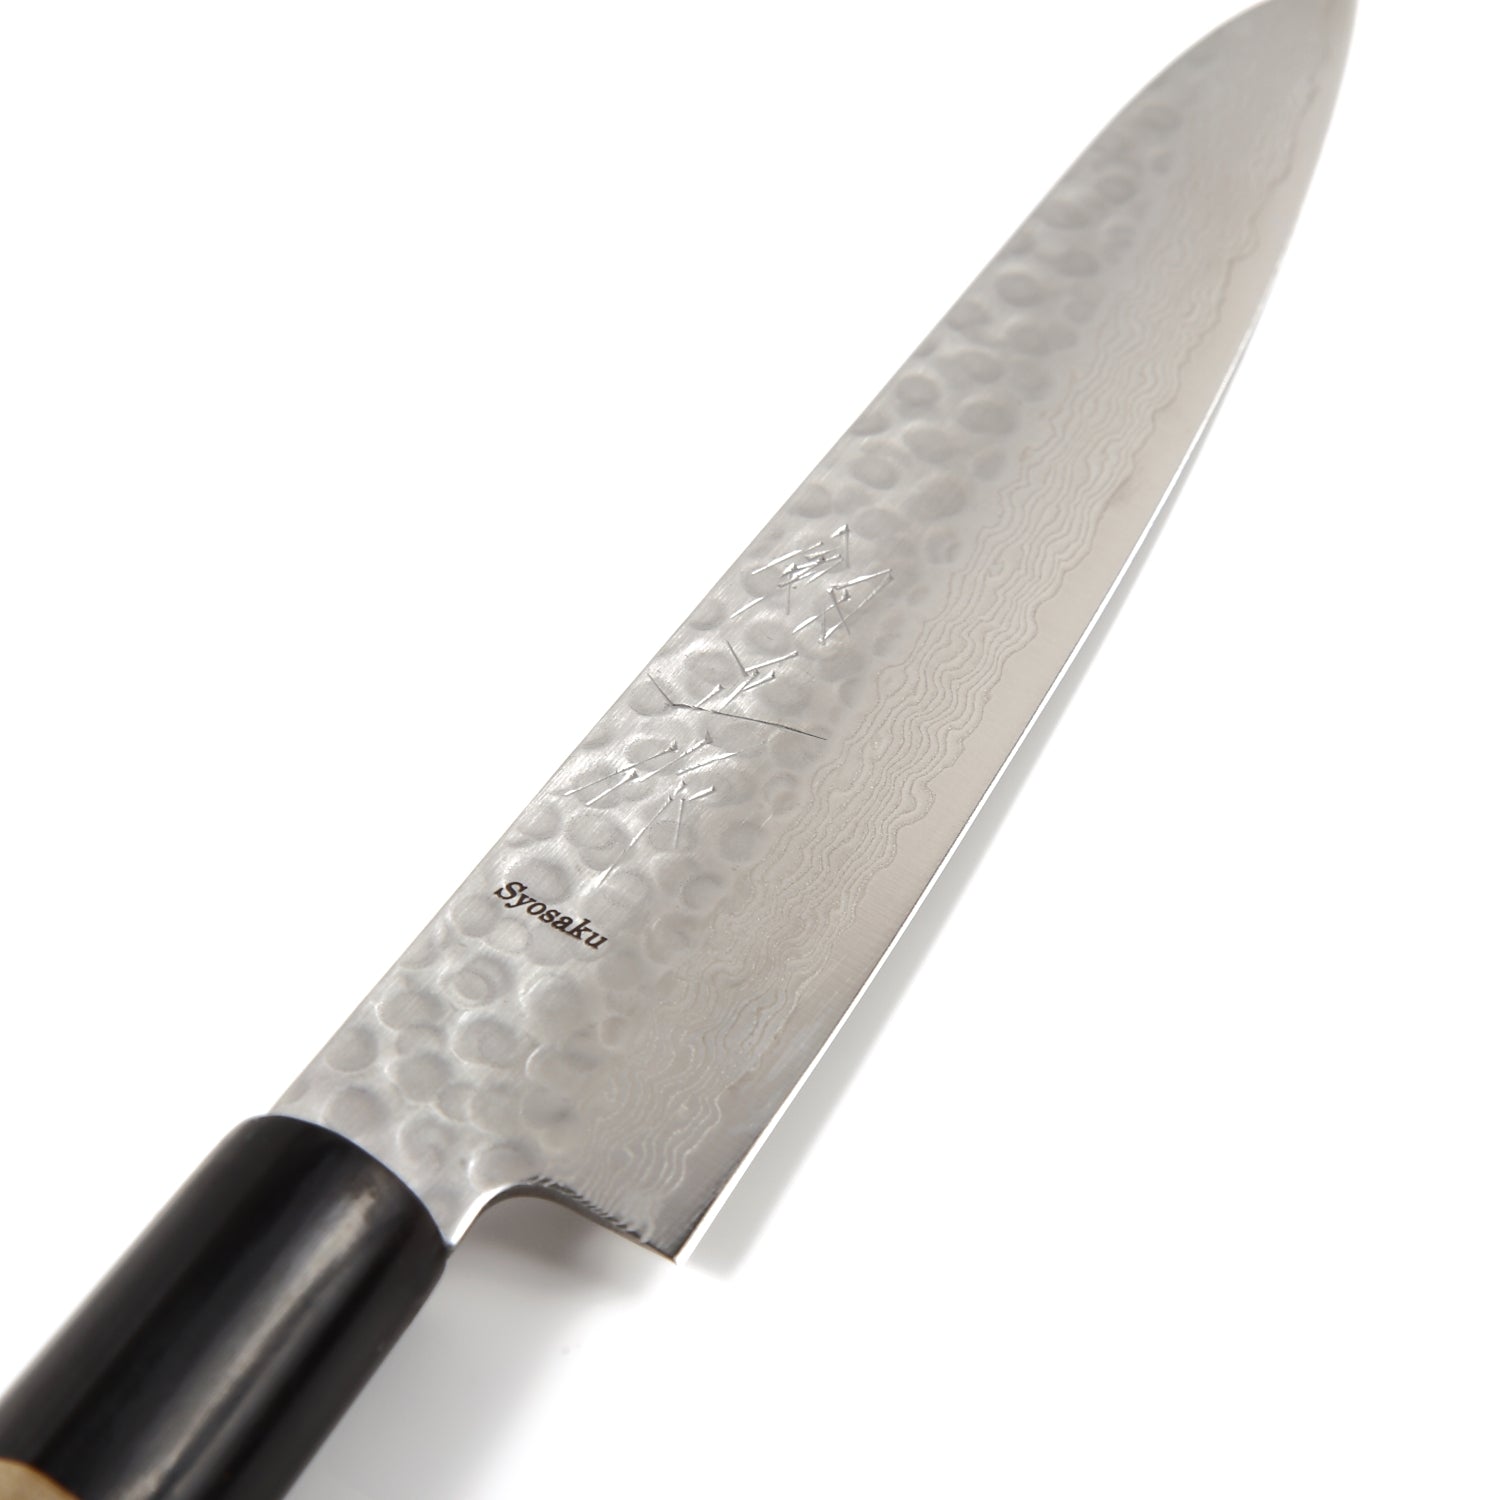 SHIRKHAN Utility Knife 6 Inch - Professional Japanese Petty Kitchen Knife -  High Carbon Hand Hammered Clad Steel Blade 10Cr15CoMoV Cutting Core 